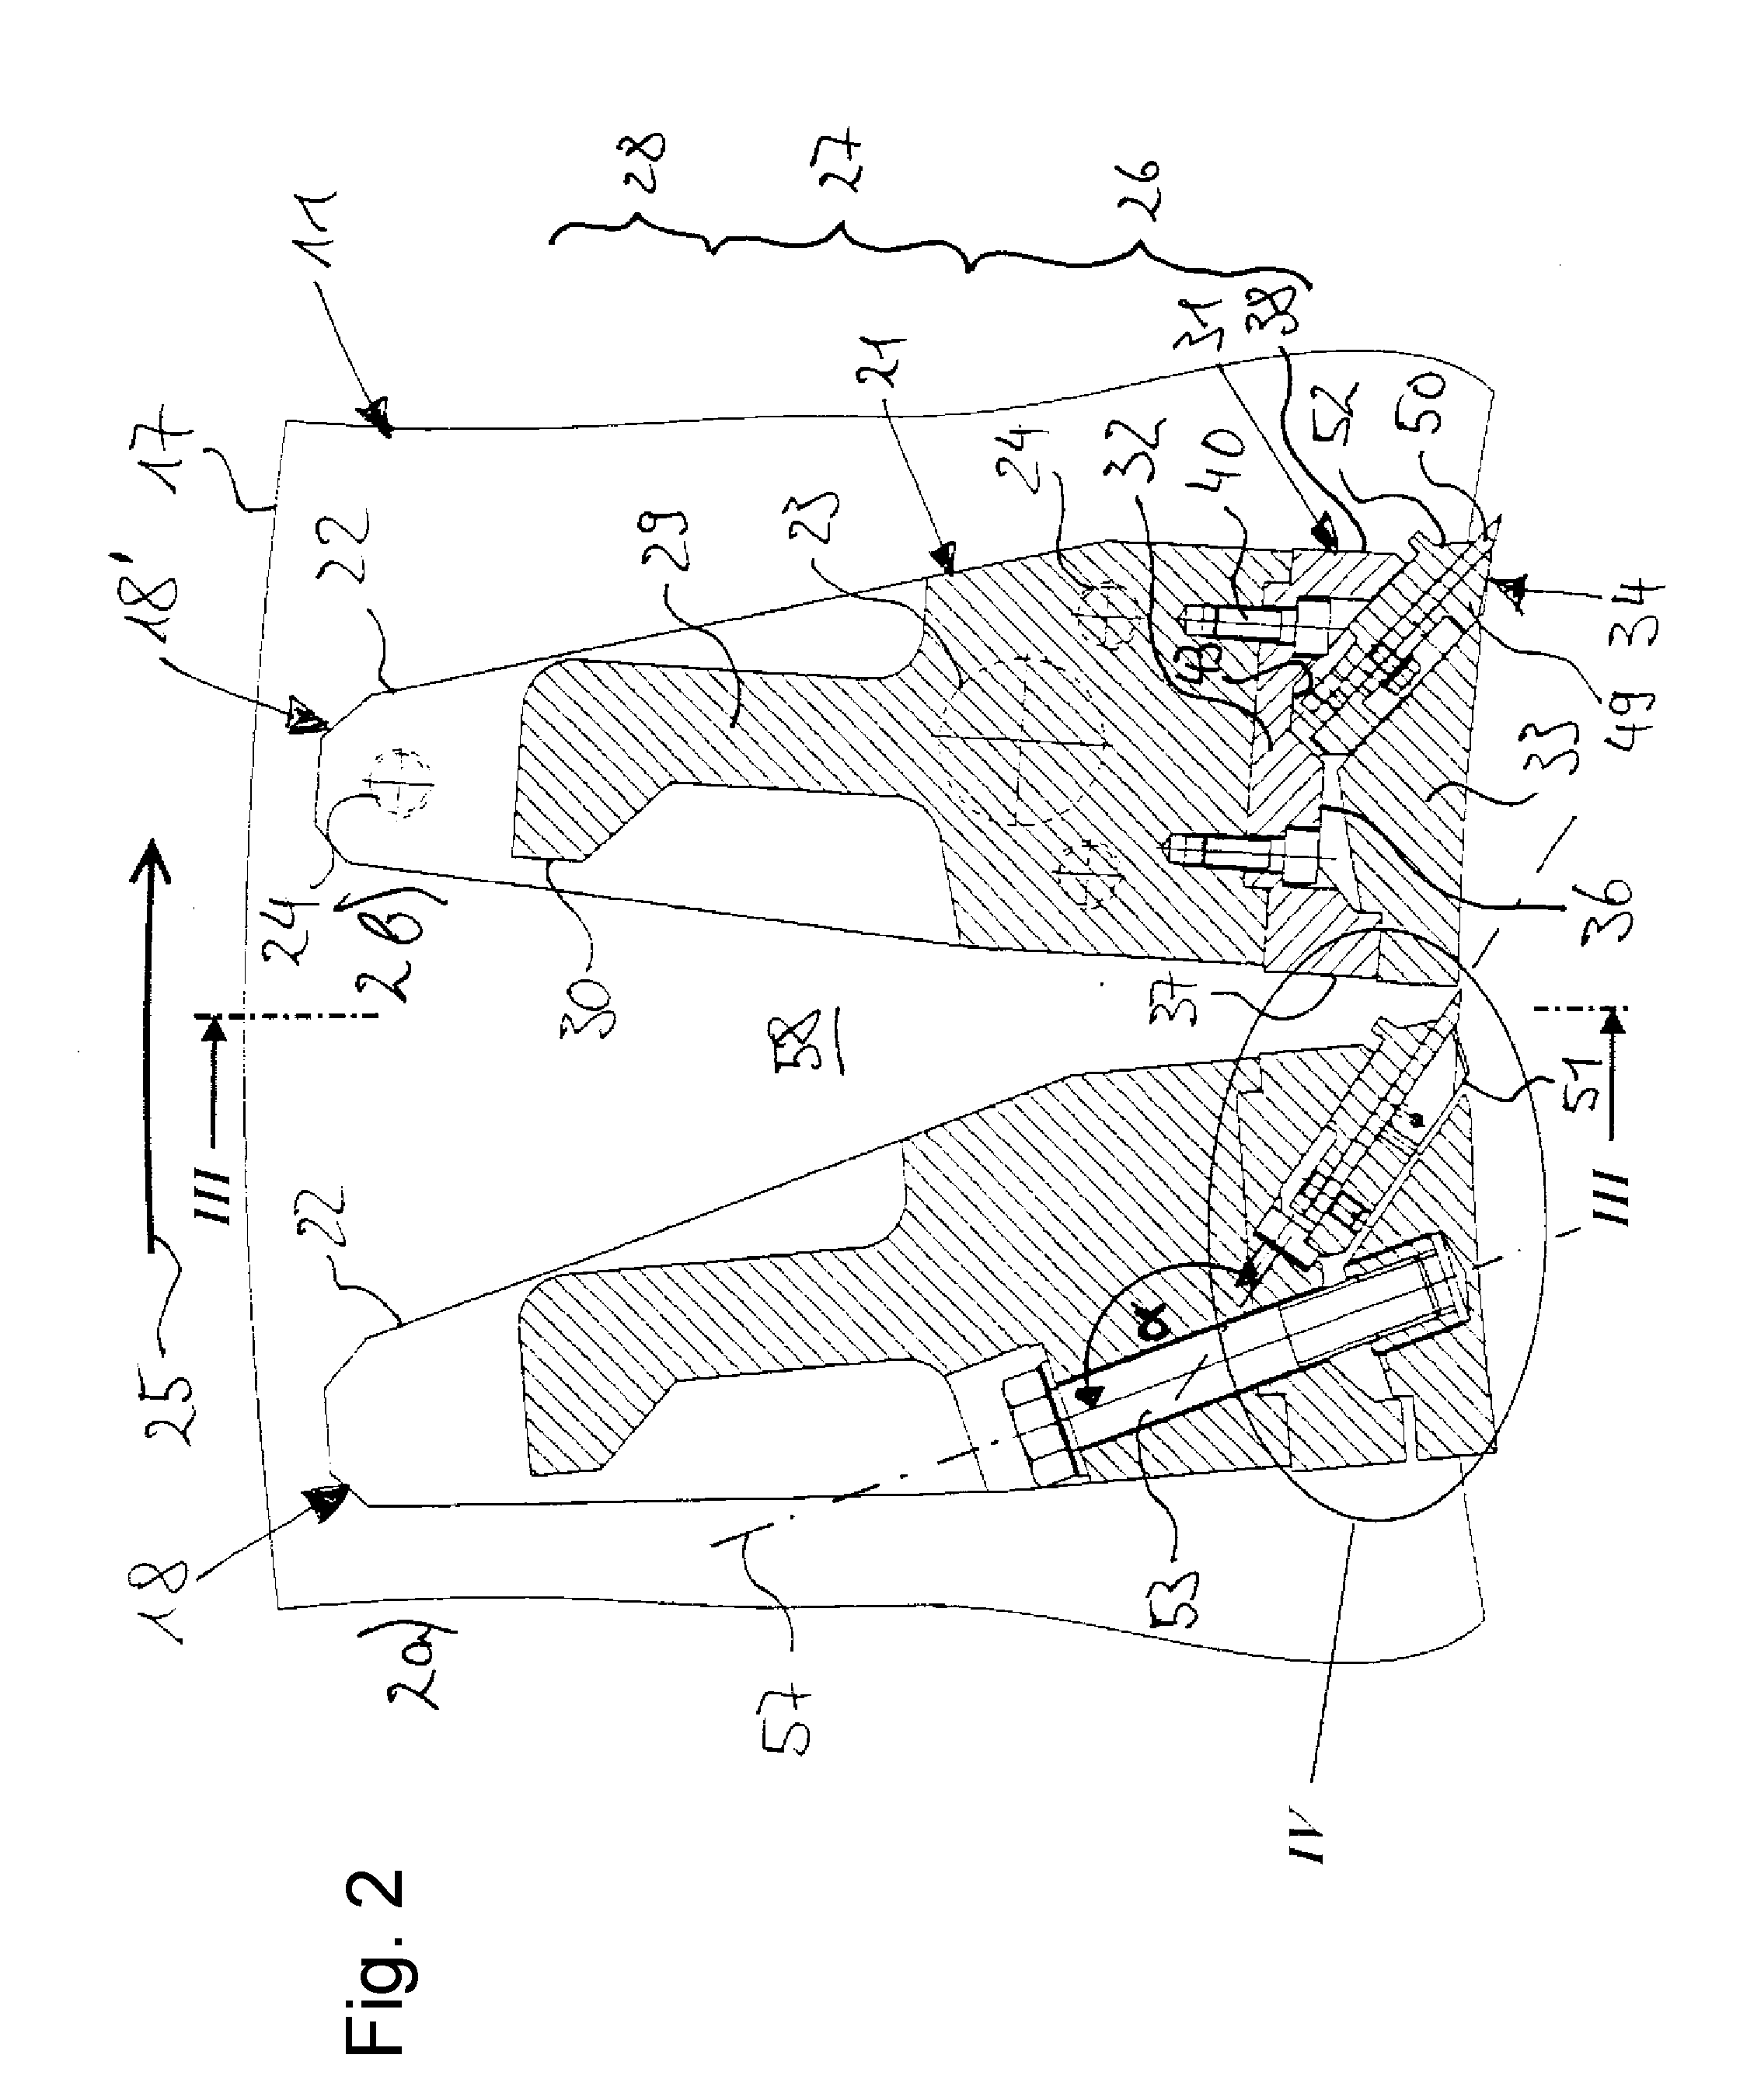 Comminuting unit for a comminuting device for comminuting feed material, in particular knife basket